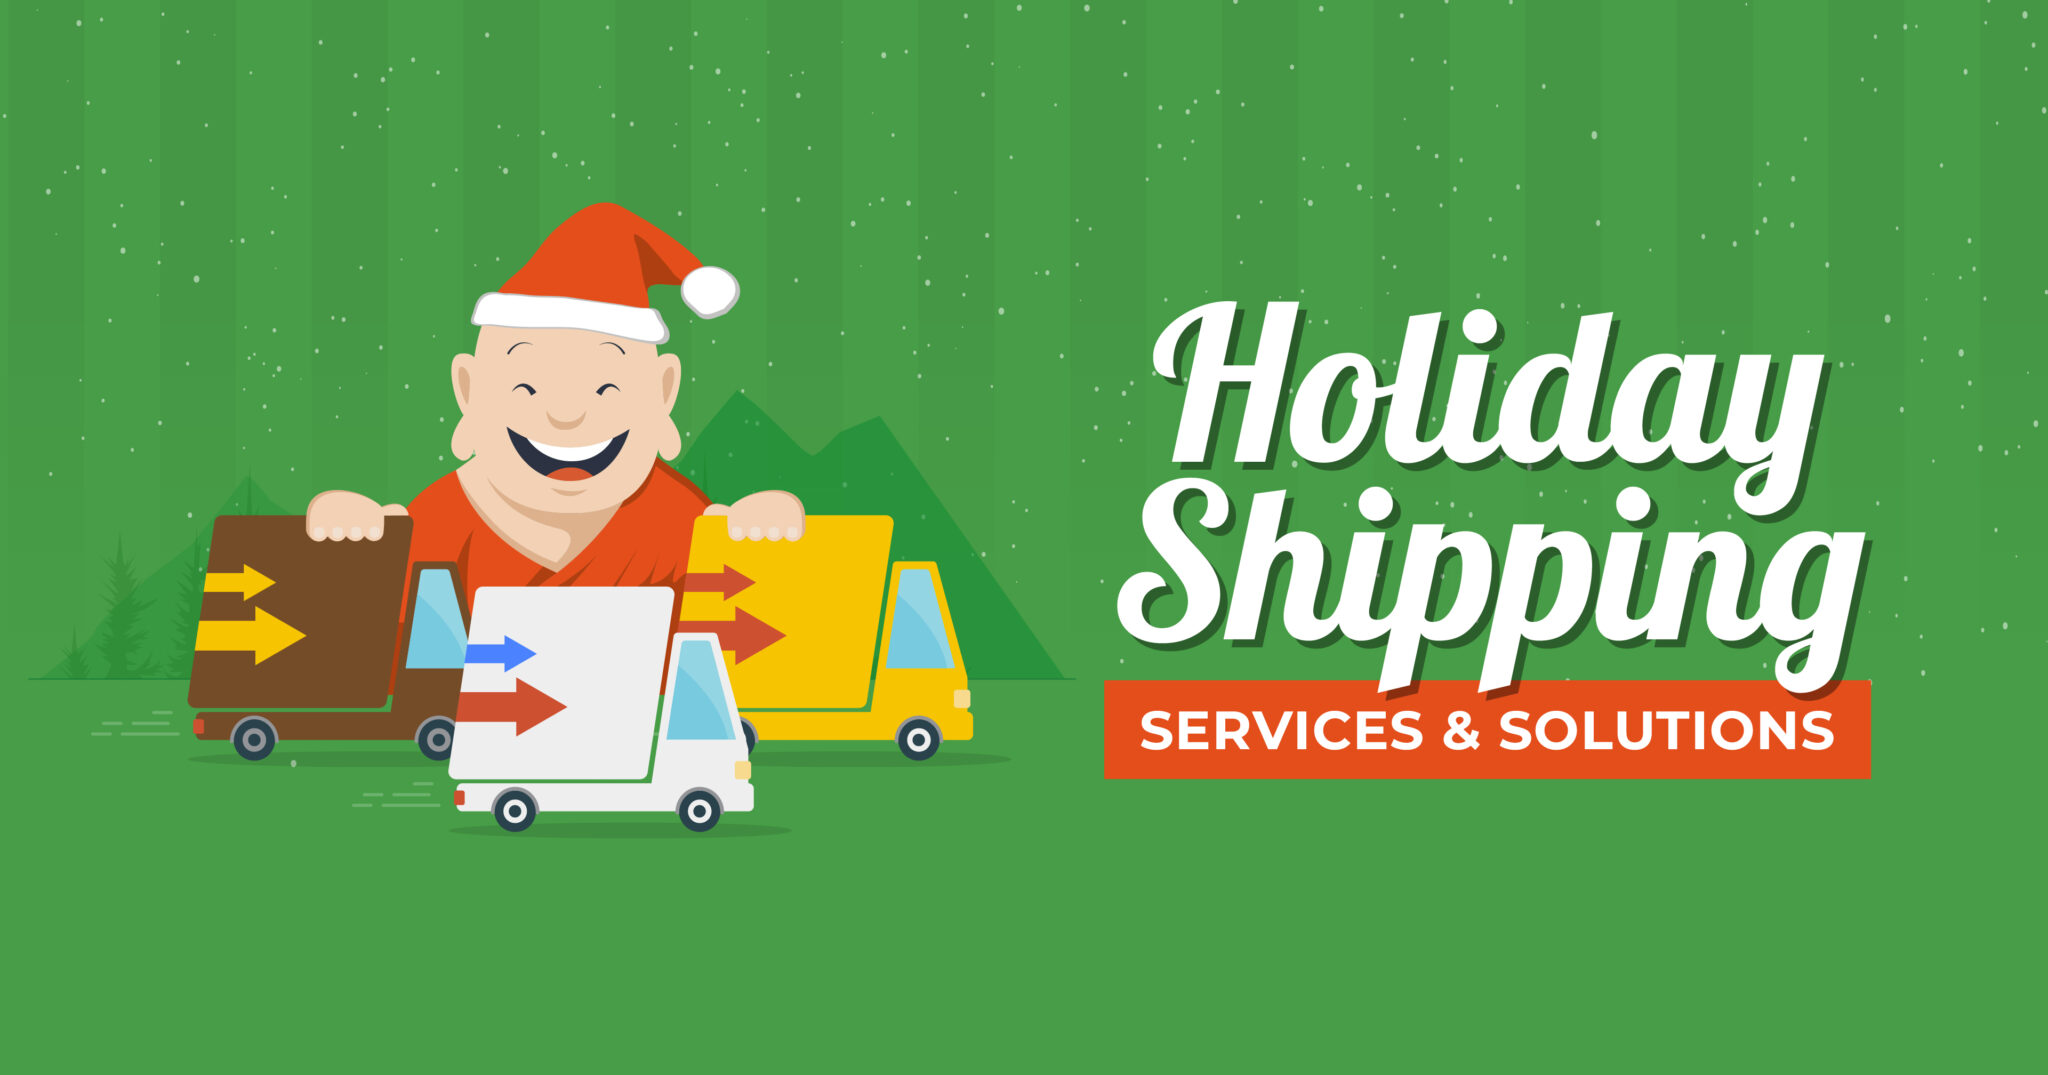 Holiday Shipping Services & Solutions